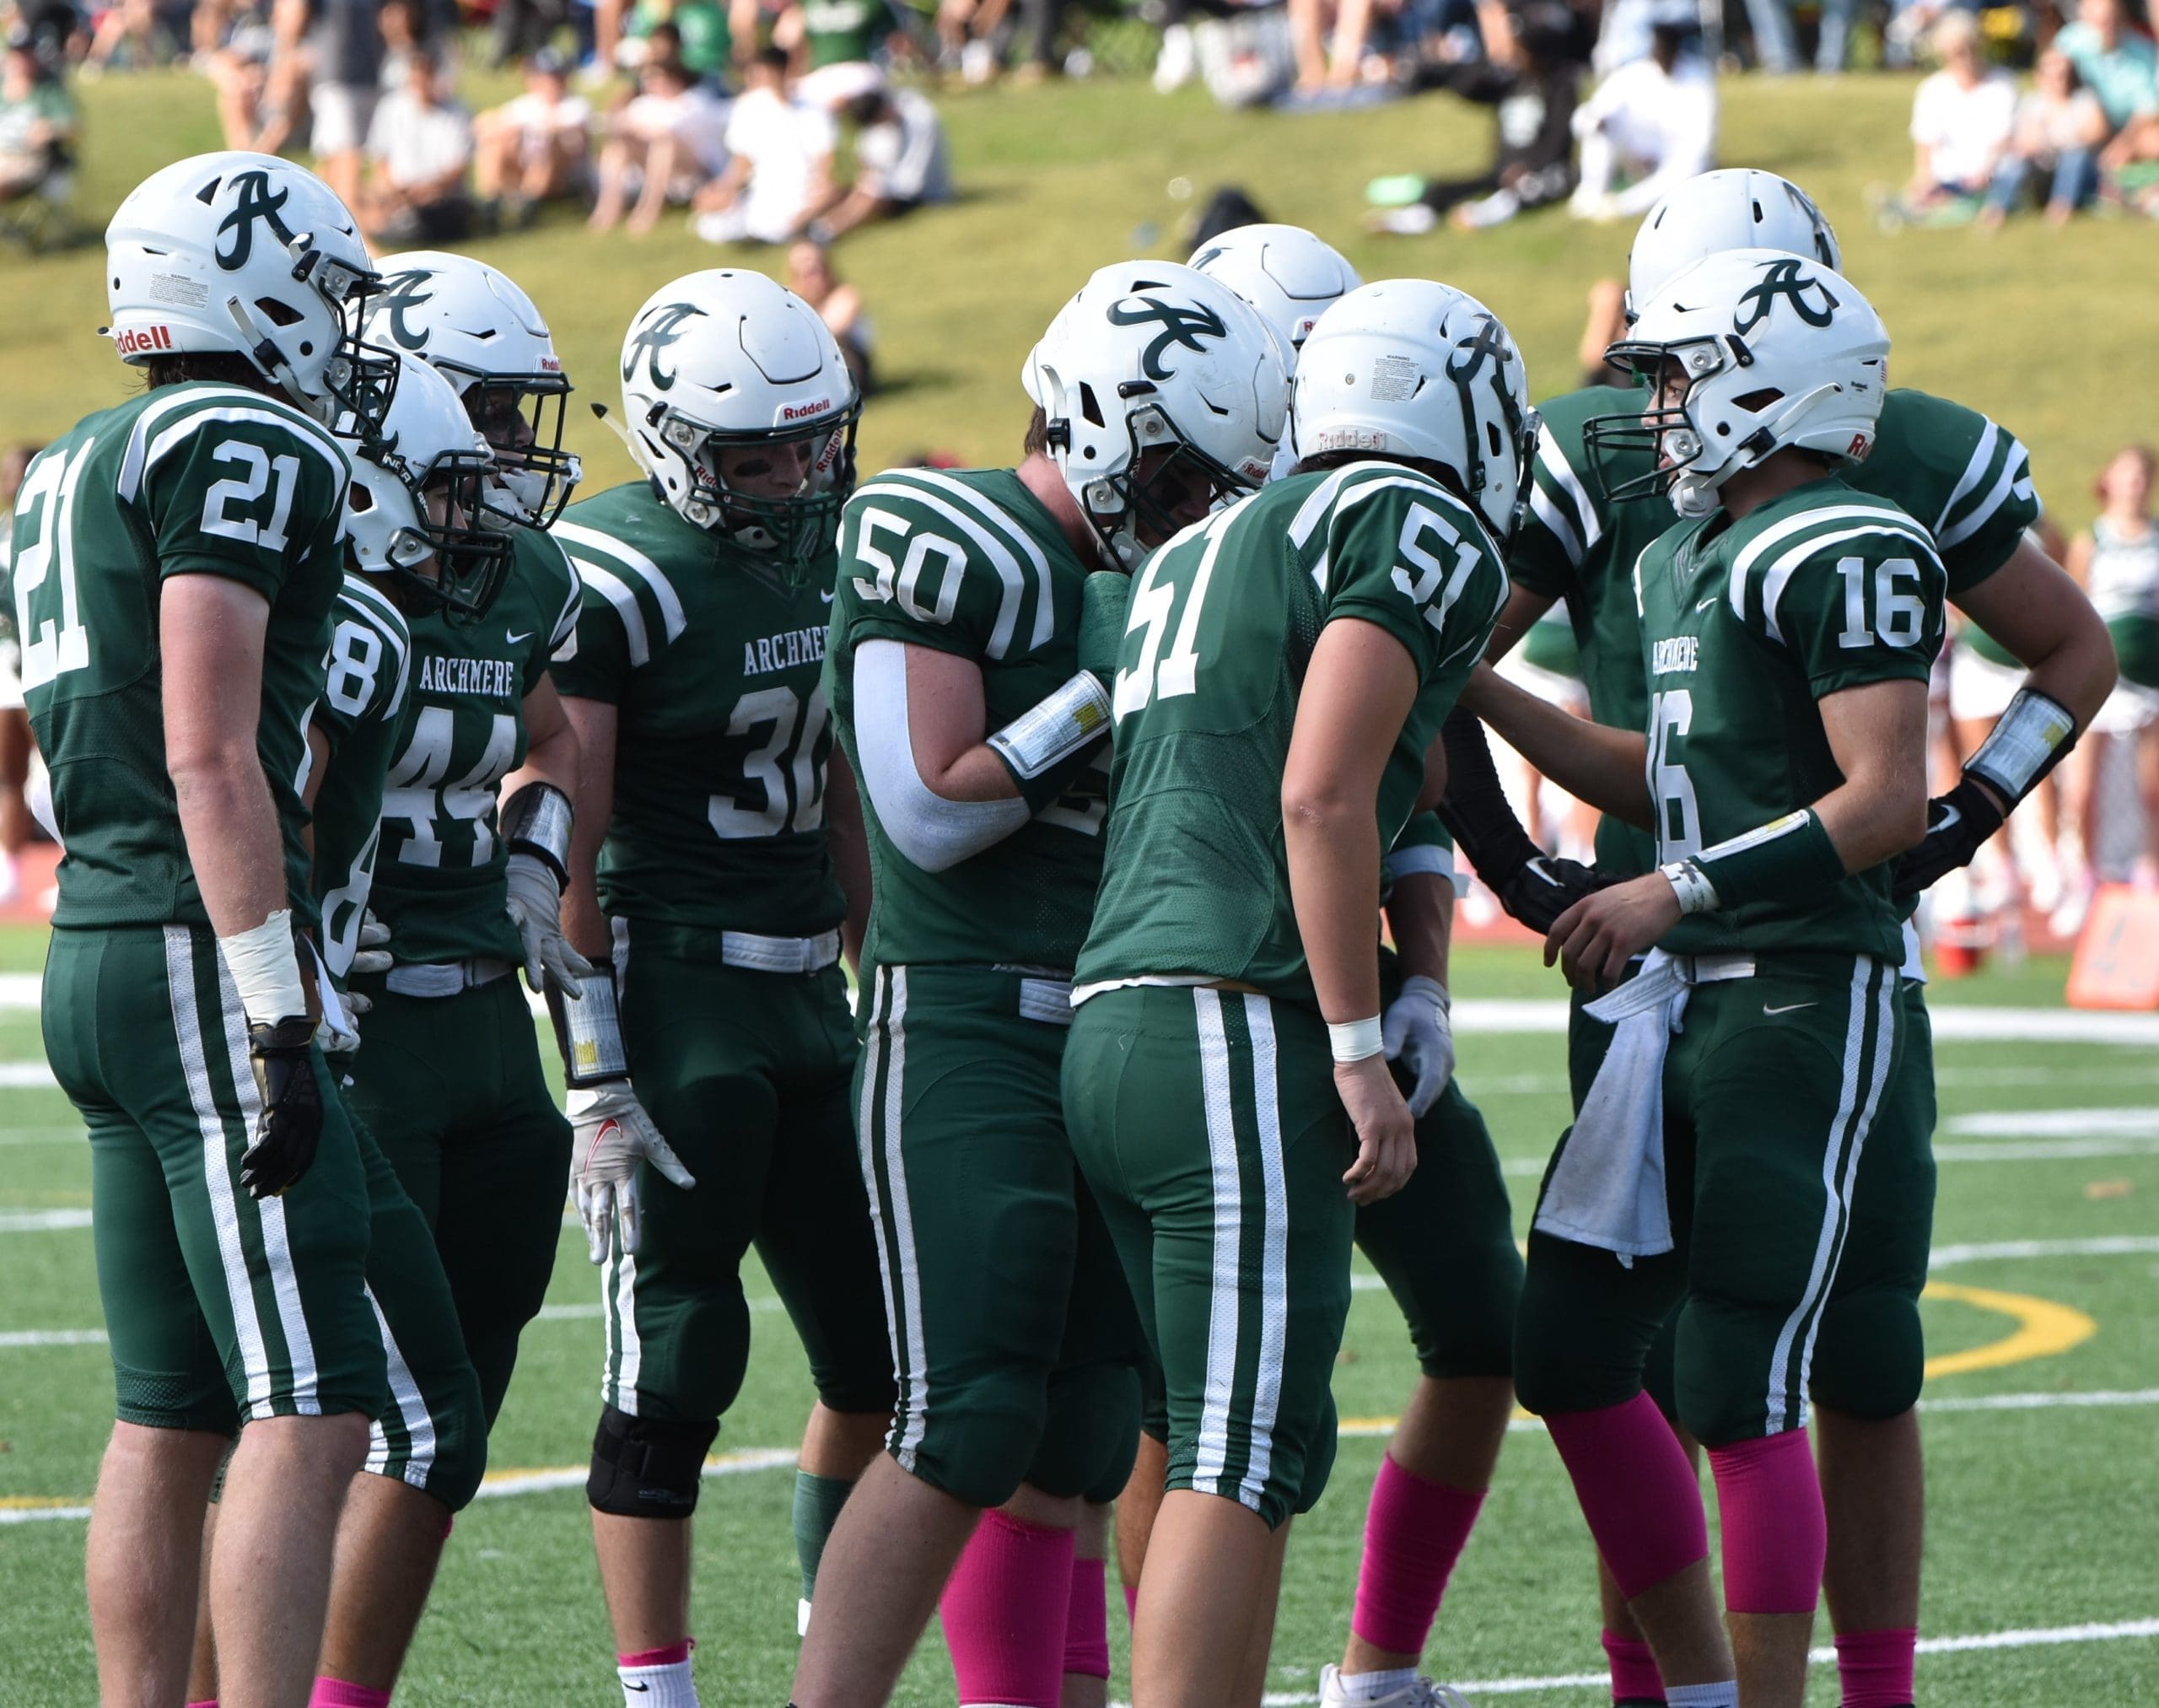 Featured image for “Archmere advances with big win”